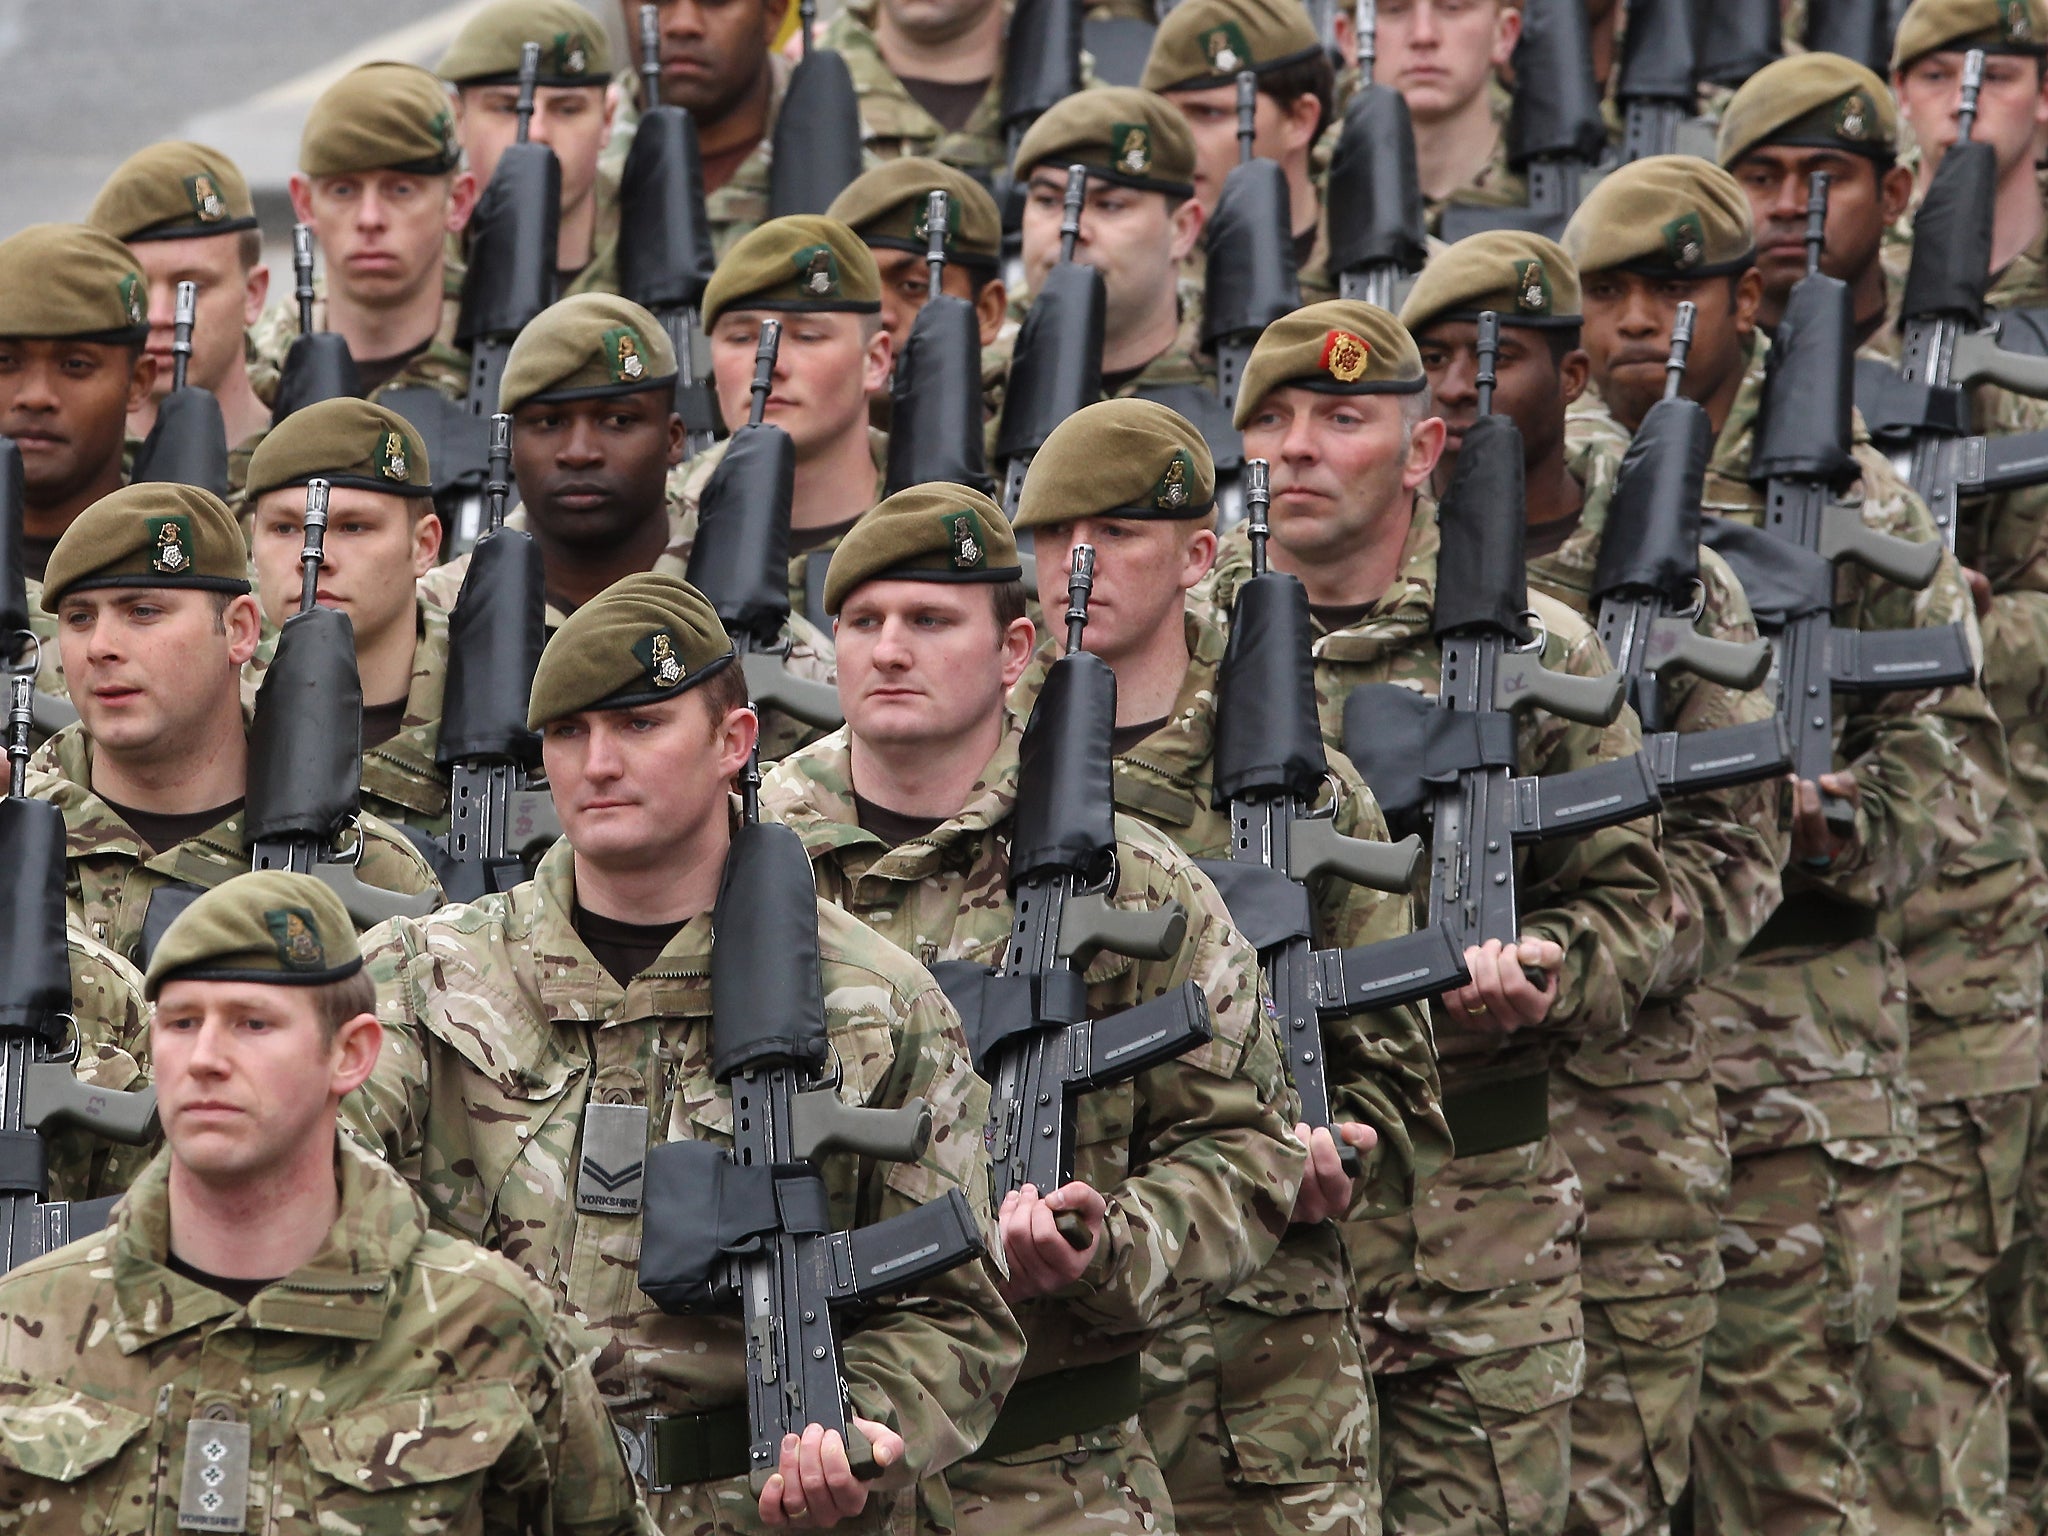 Returning forces will mainly be stationed around Salisbury Plain, Edinburgh and Leuchars, Catterick, Aldershot, Colchester, Stafford and the East Midlands